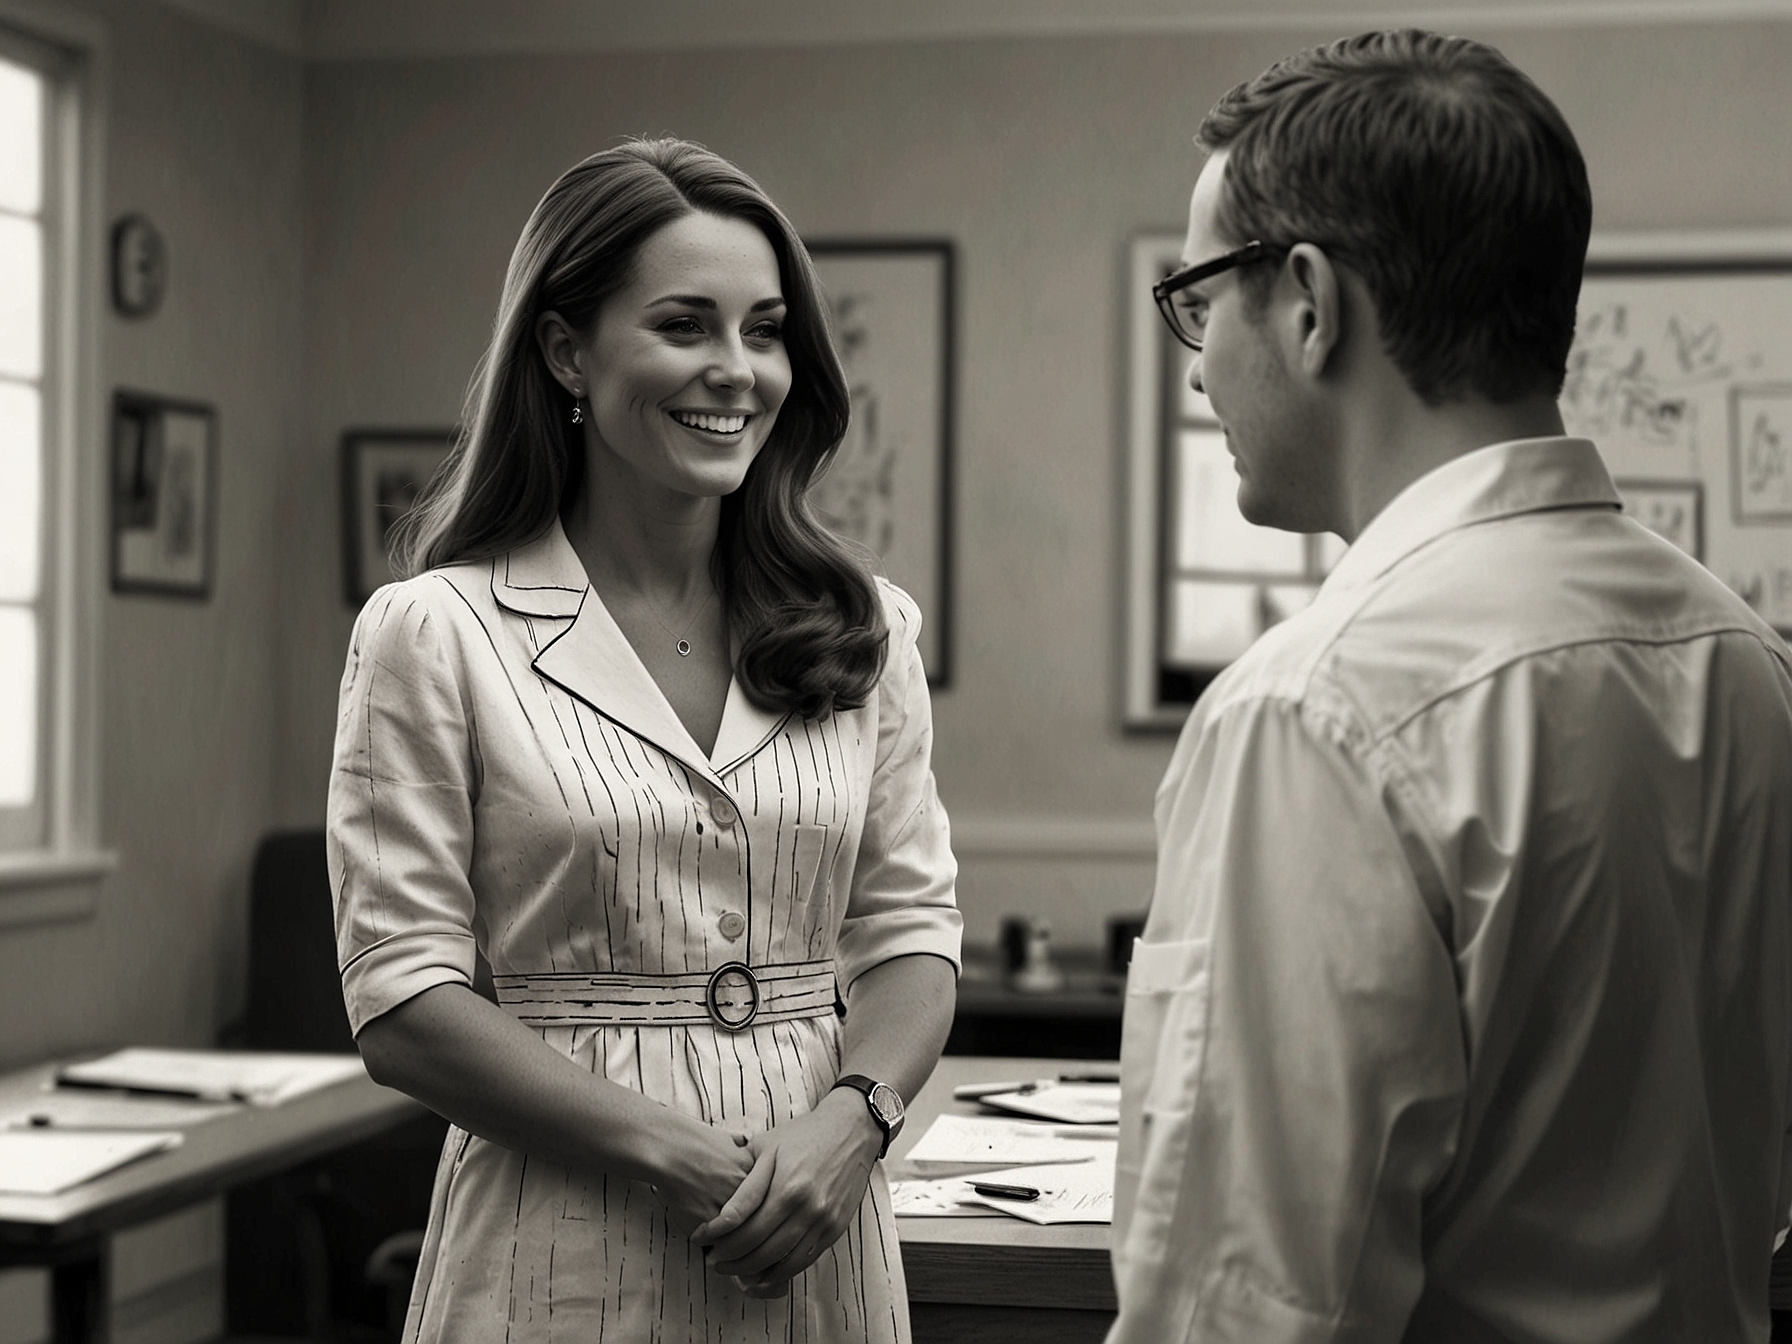 Kate Middleton, dressed elegantly, interacting with healthcare staff, providing words of encouragement and showing her unwavering support during a challenging time.